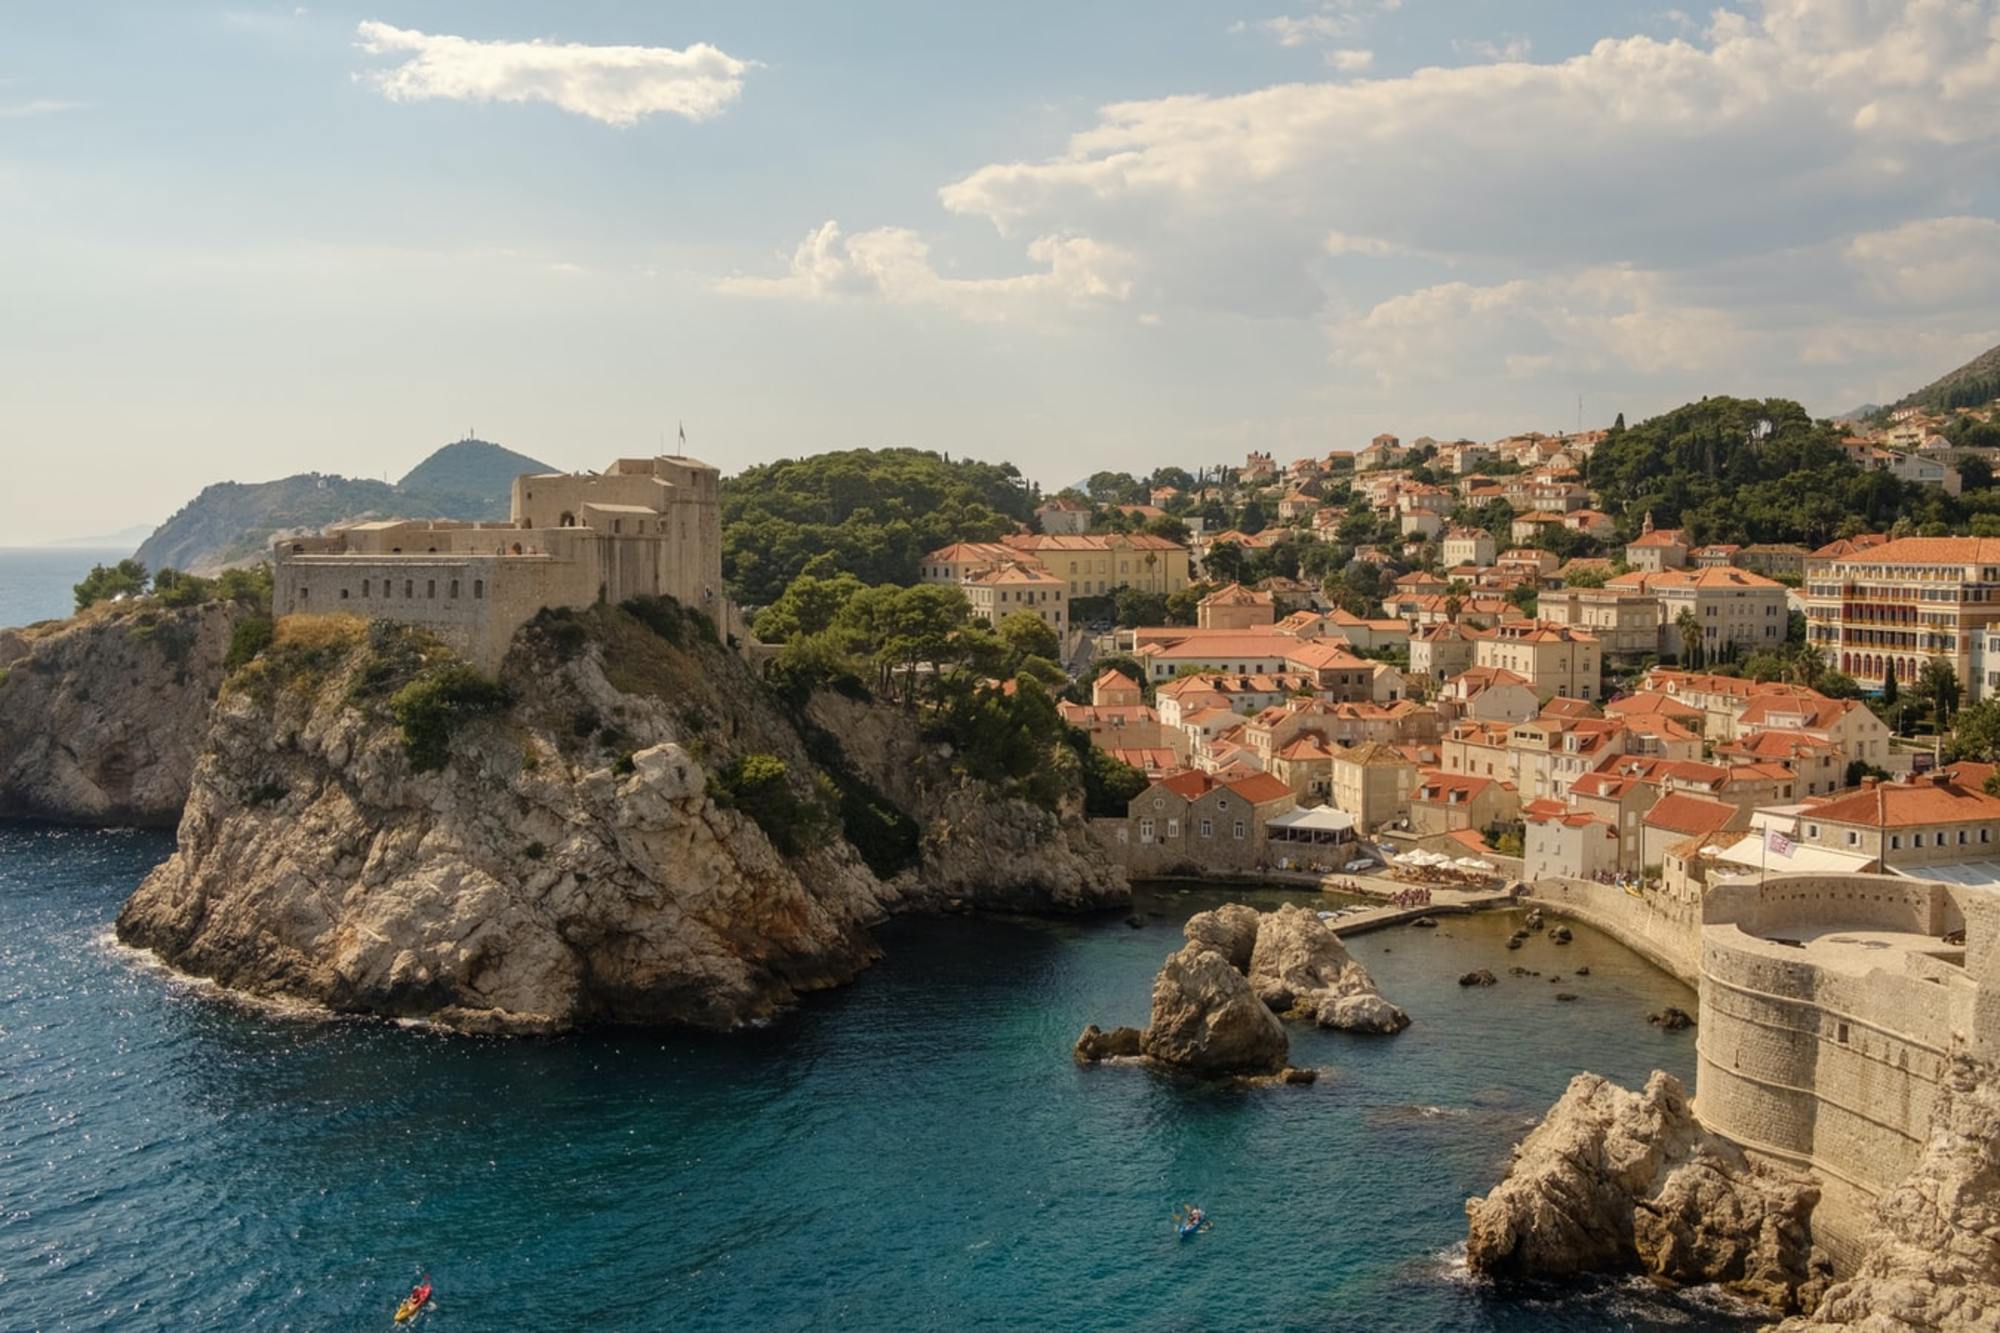 Croatia: pros and cons of relocation